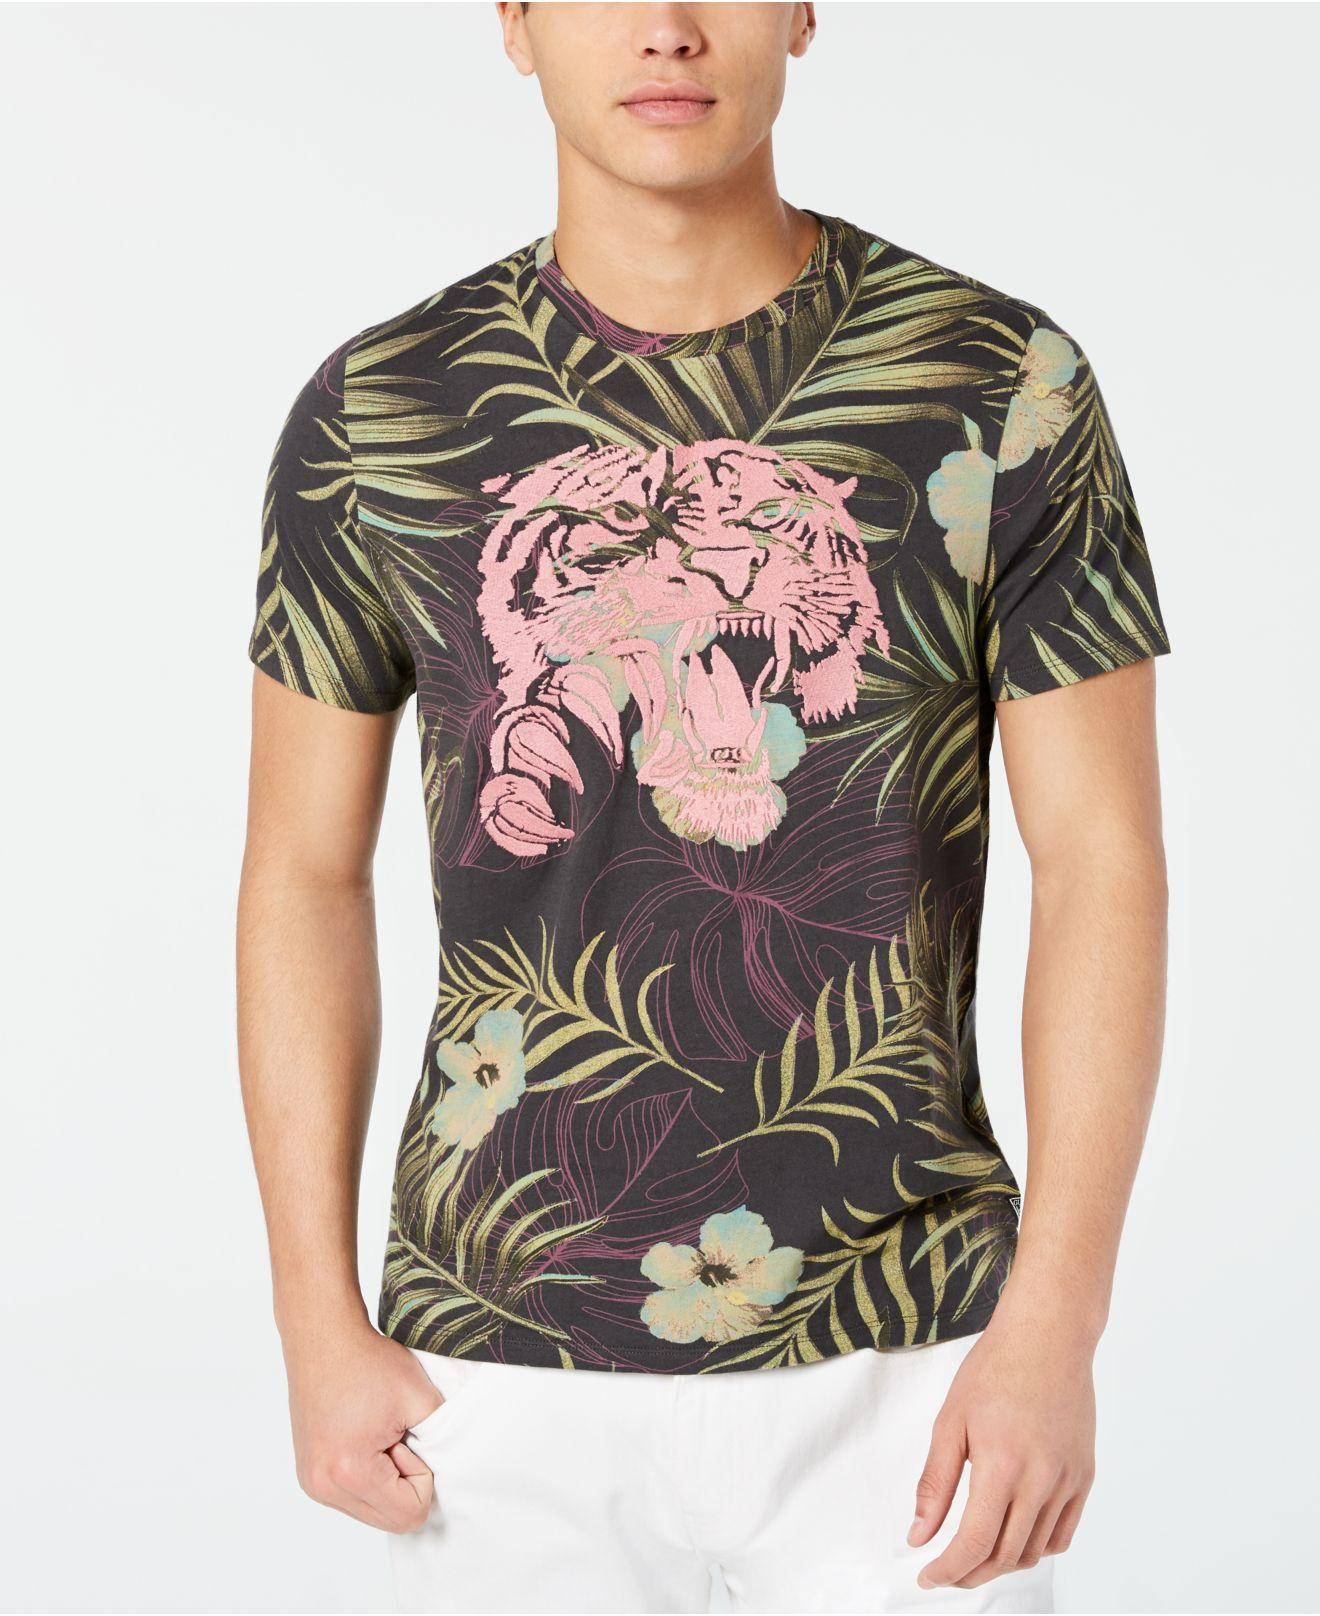 Guess Jungle Tiger Graphic T-shirt for Men - Lyst